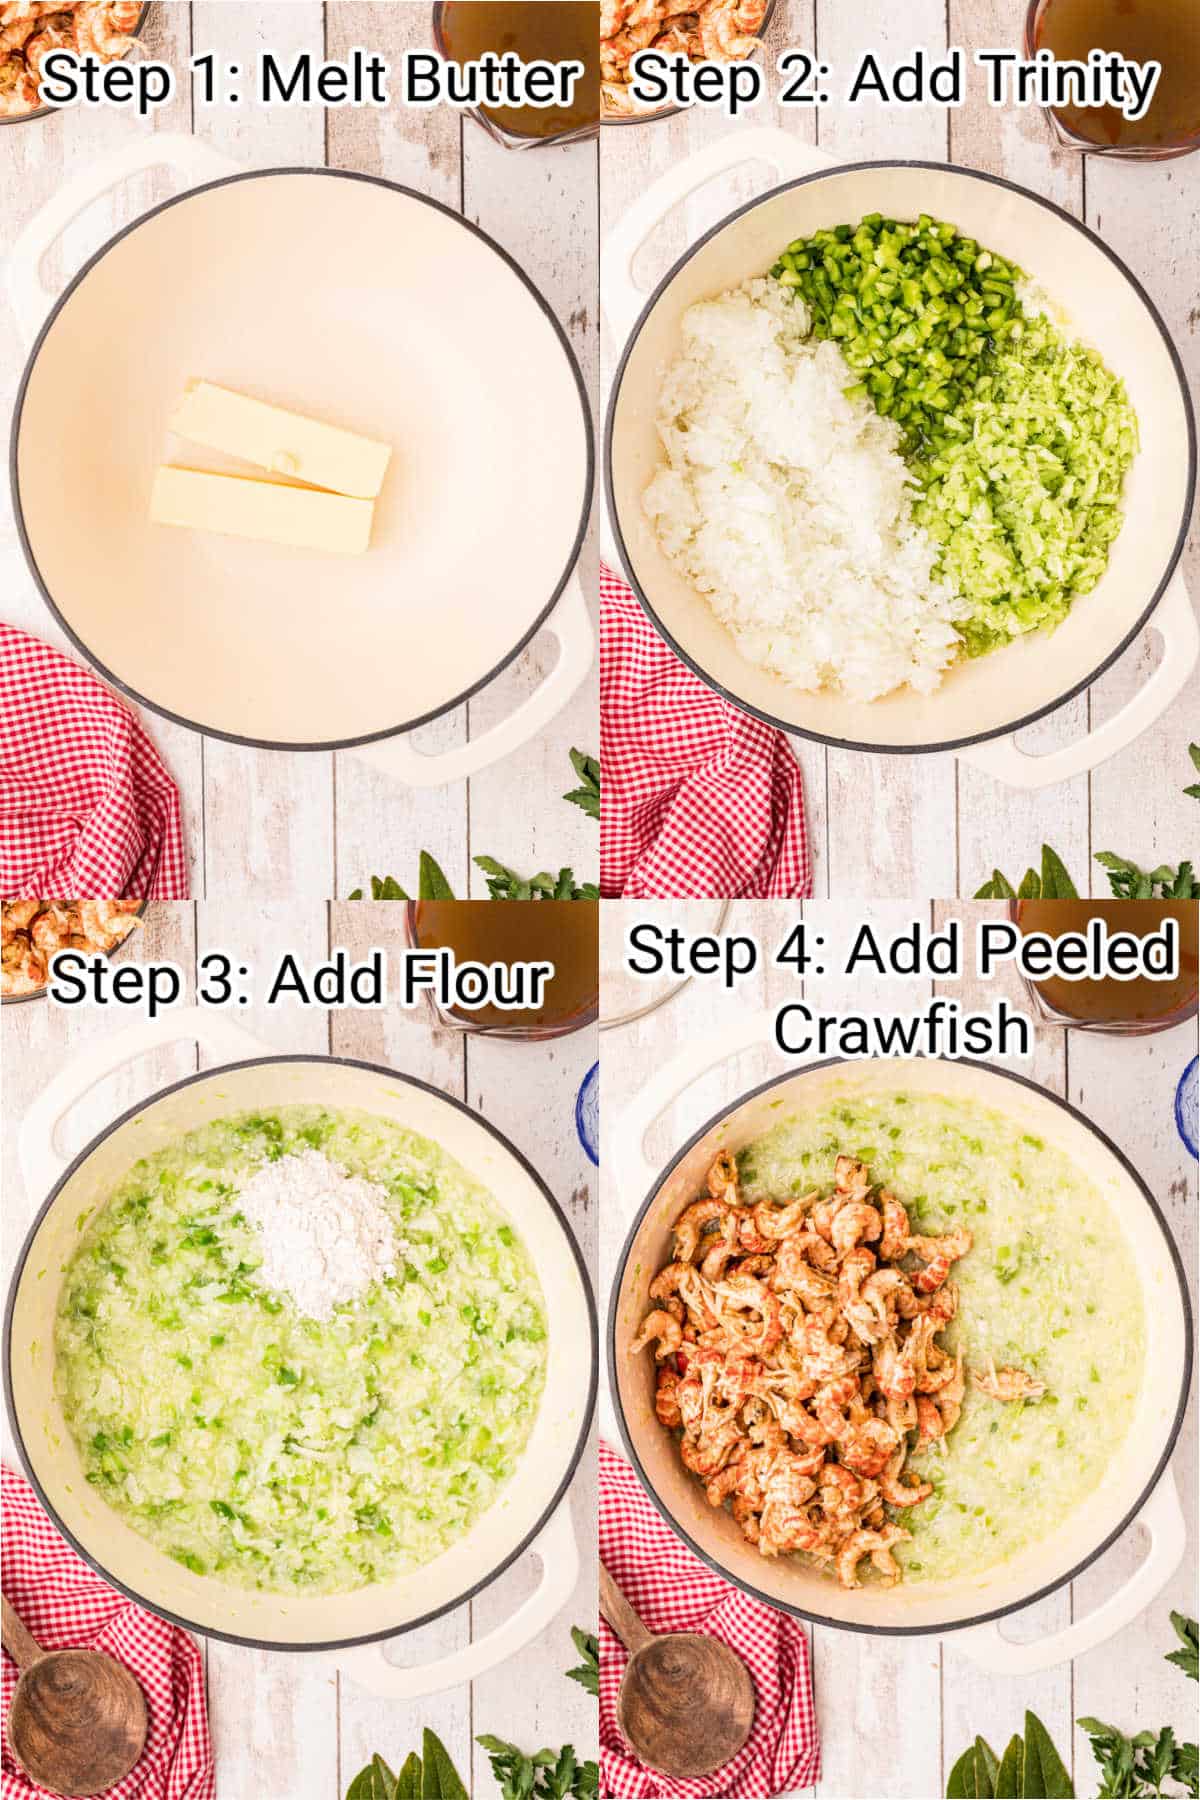 four pictures showing steps needed for making a crawfish etouffee